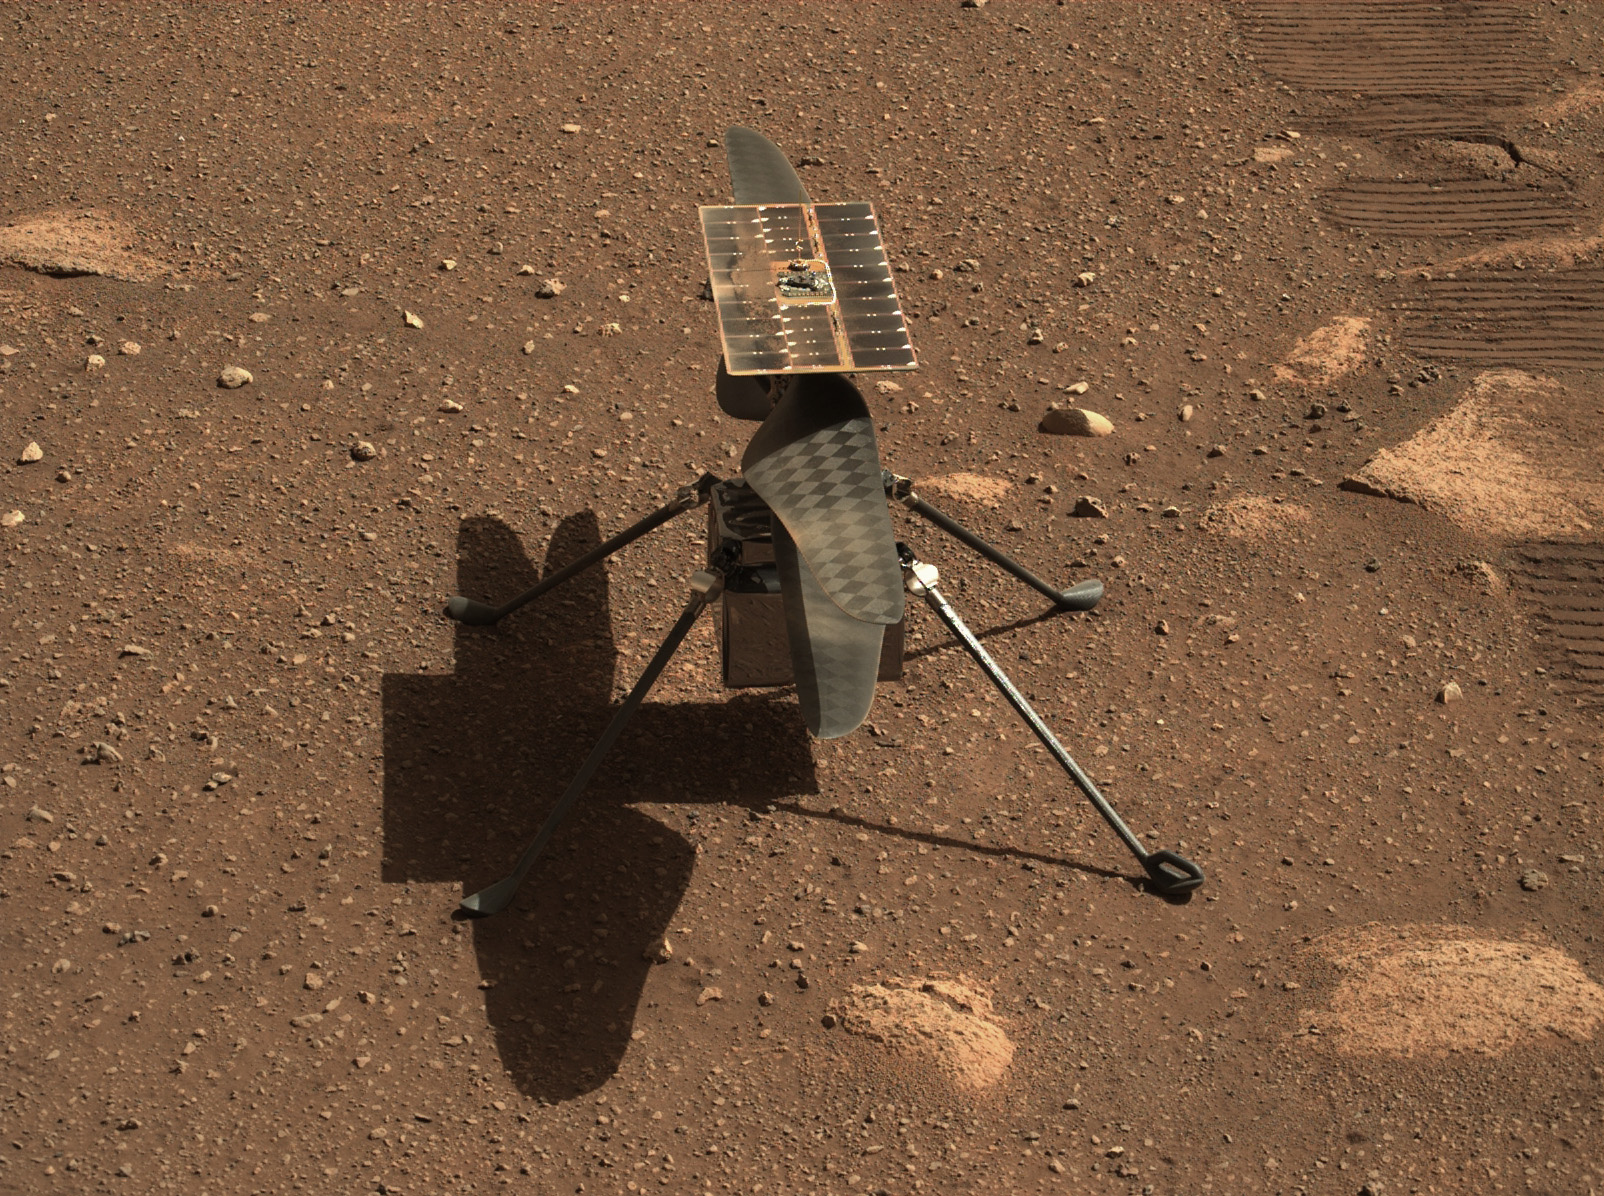 NASA’s Mars helicopter Ingenuity couldn’t cruise till next week at the earliest